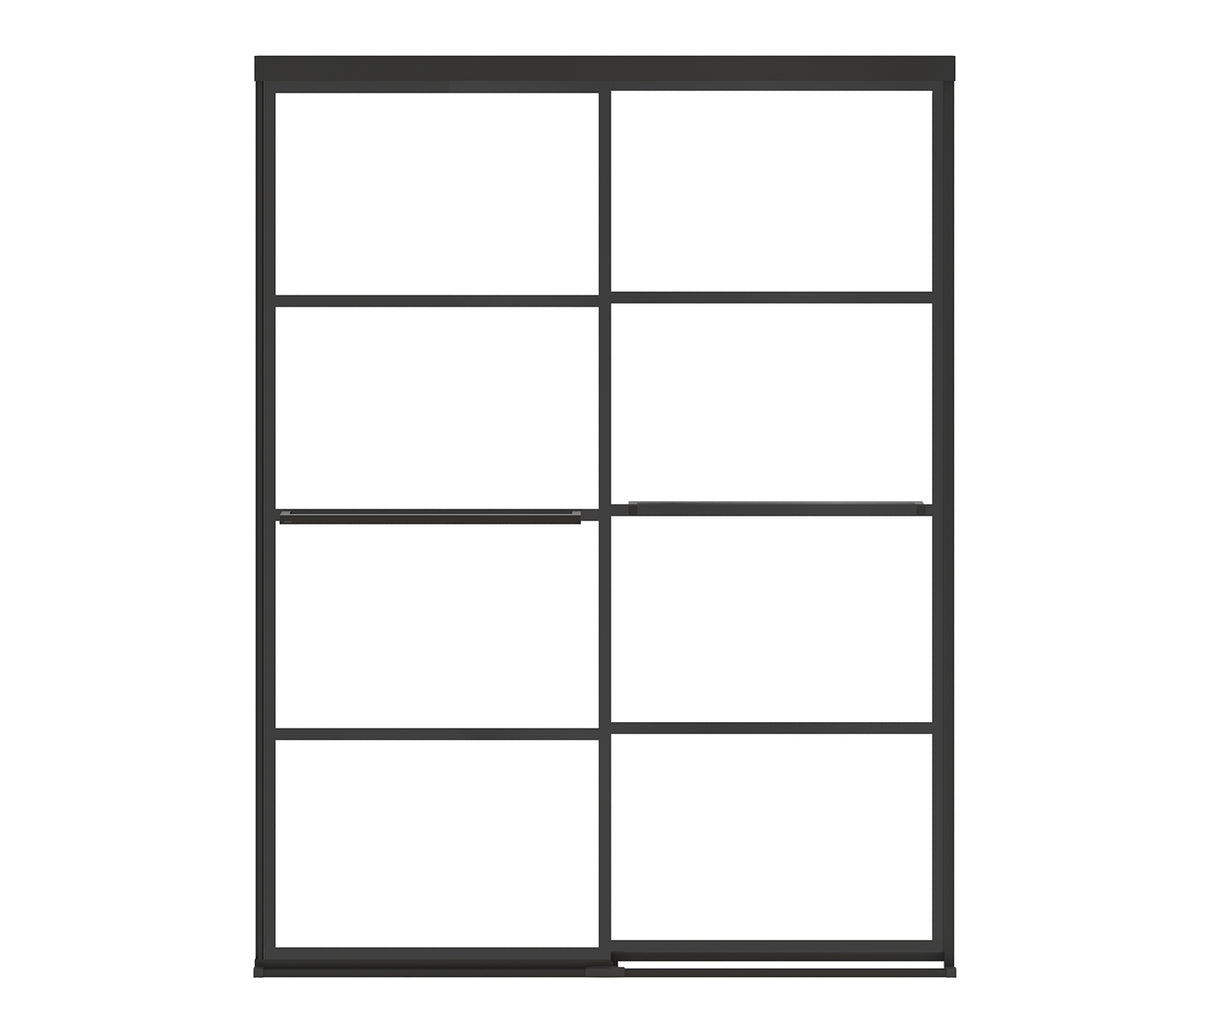 MAAX 135332-972-340-000 Incognito 76 Shaker 56-59 x 76 in. 8mm Bypass Shower Door for Alcove Installation with Shaker glass in Matte Black